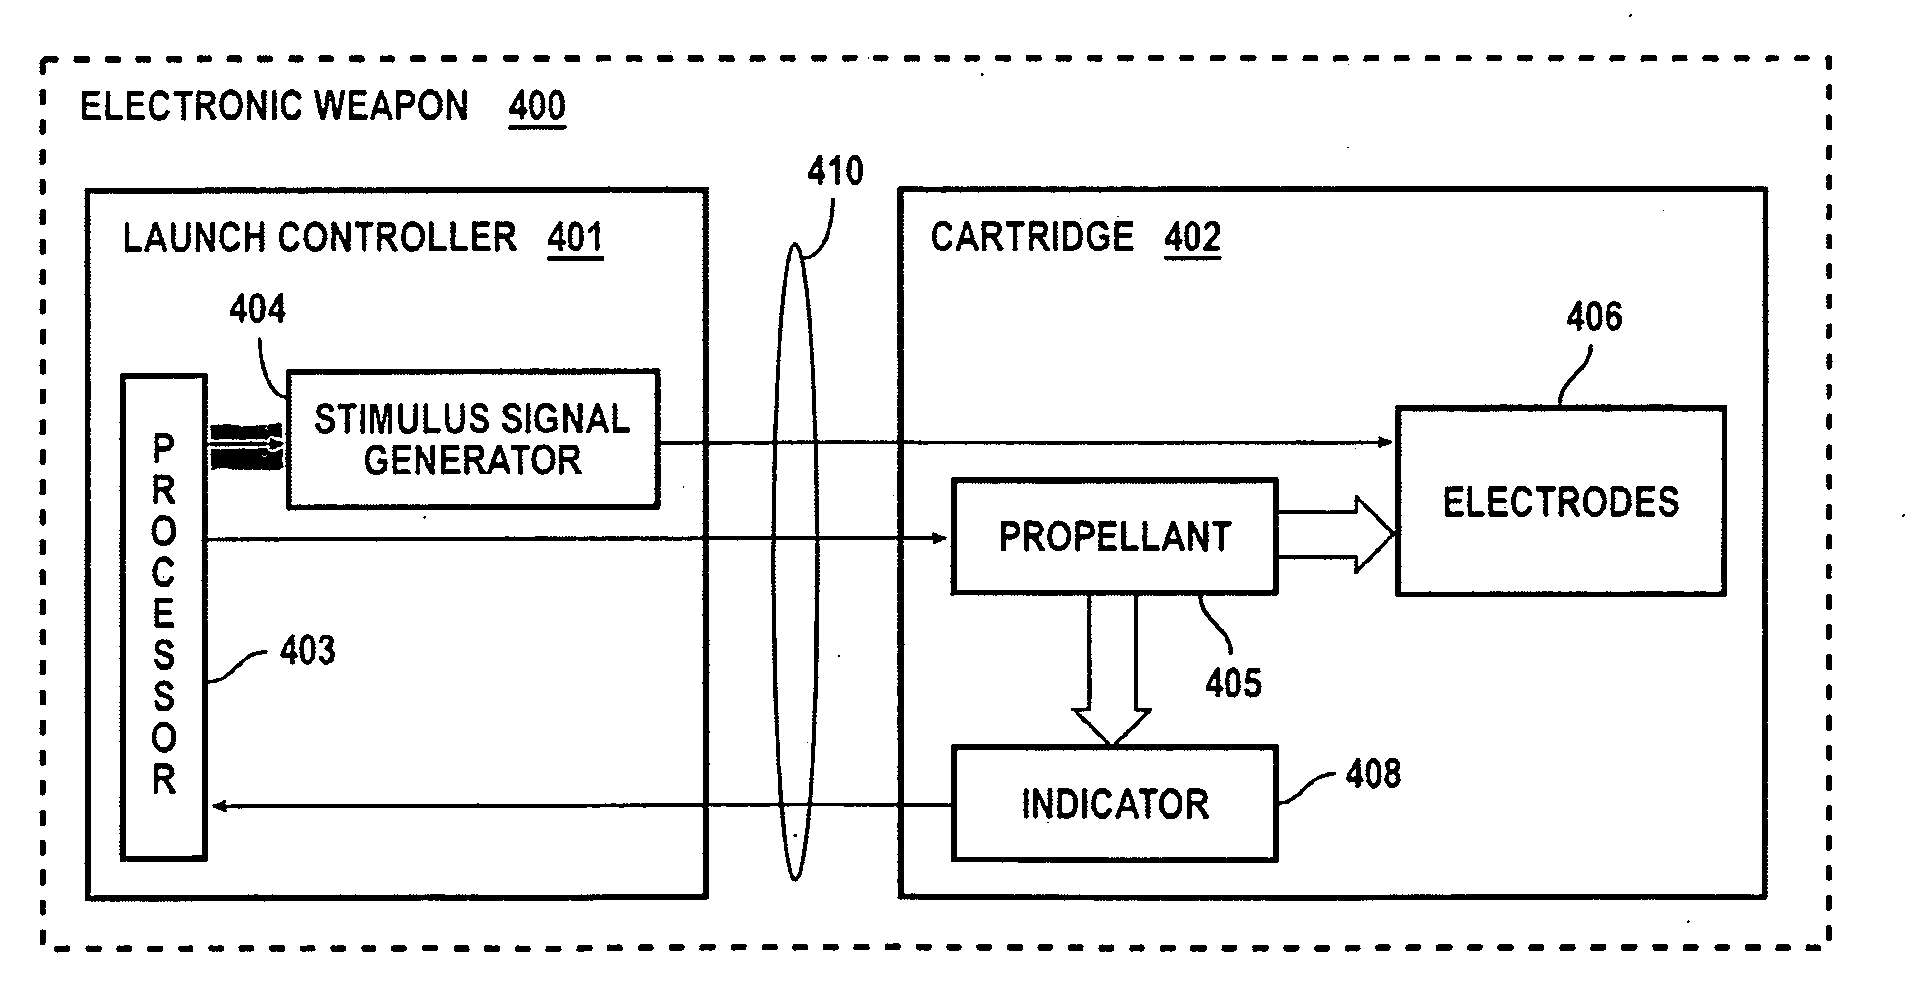 Systems and methods for indicating properties of a unit for deployment for electronic weaponry